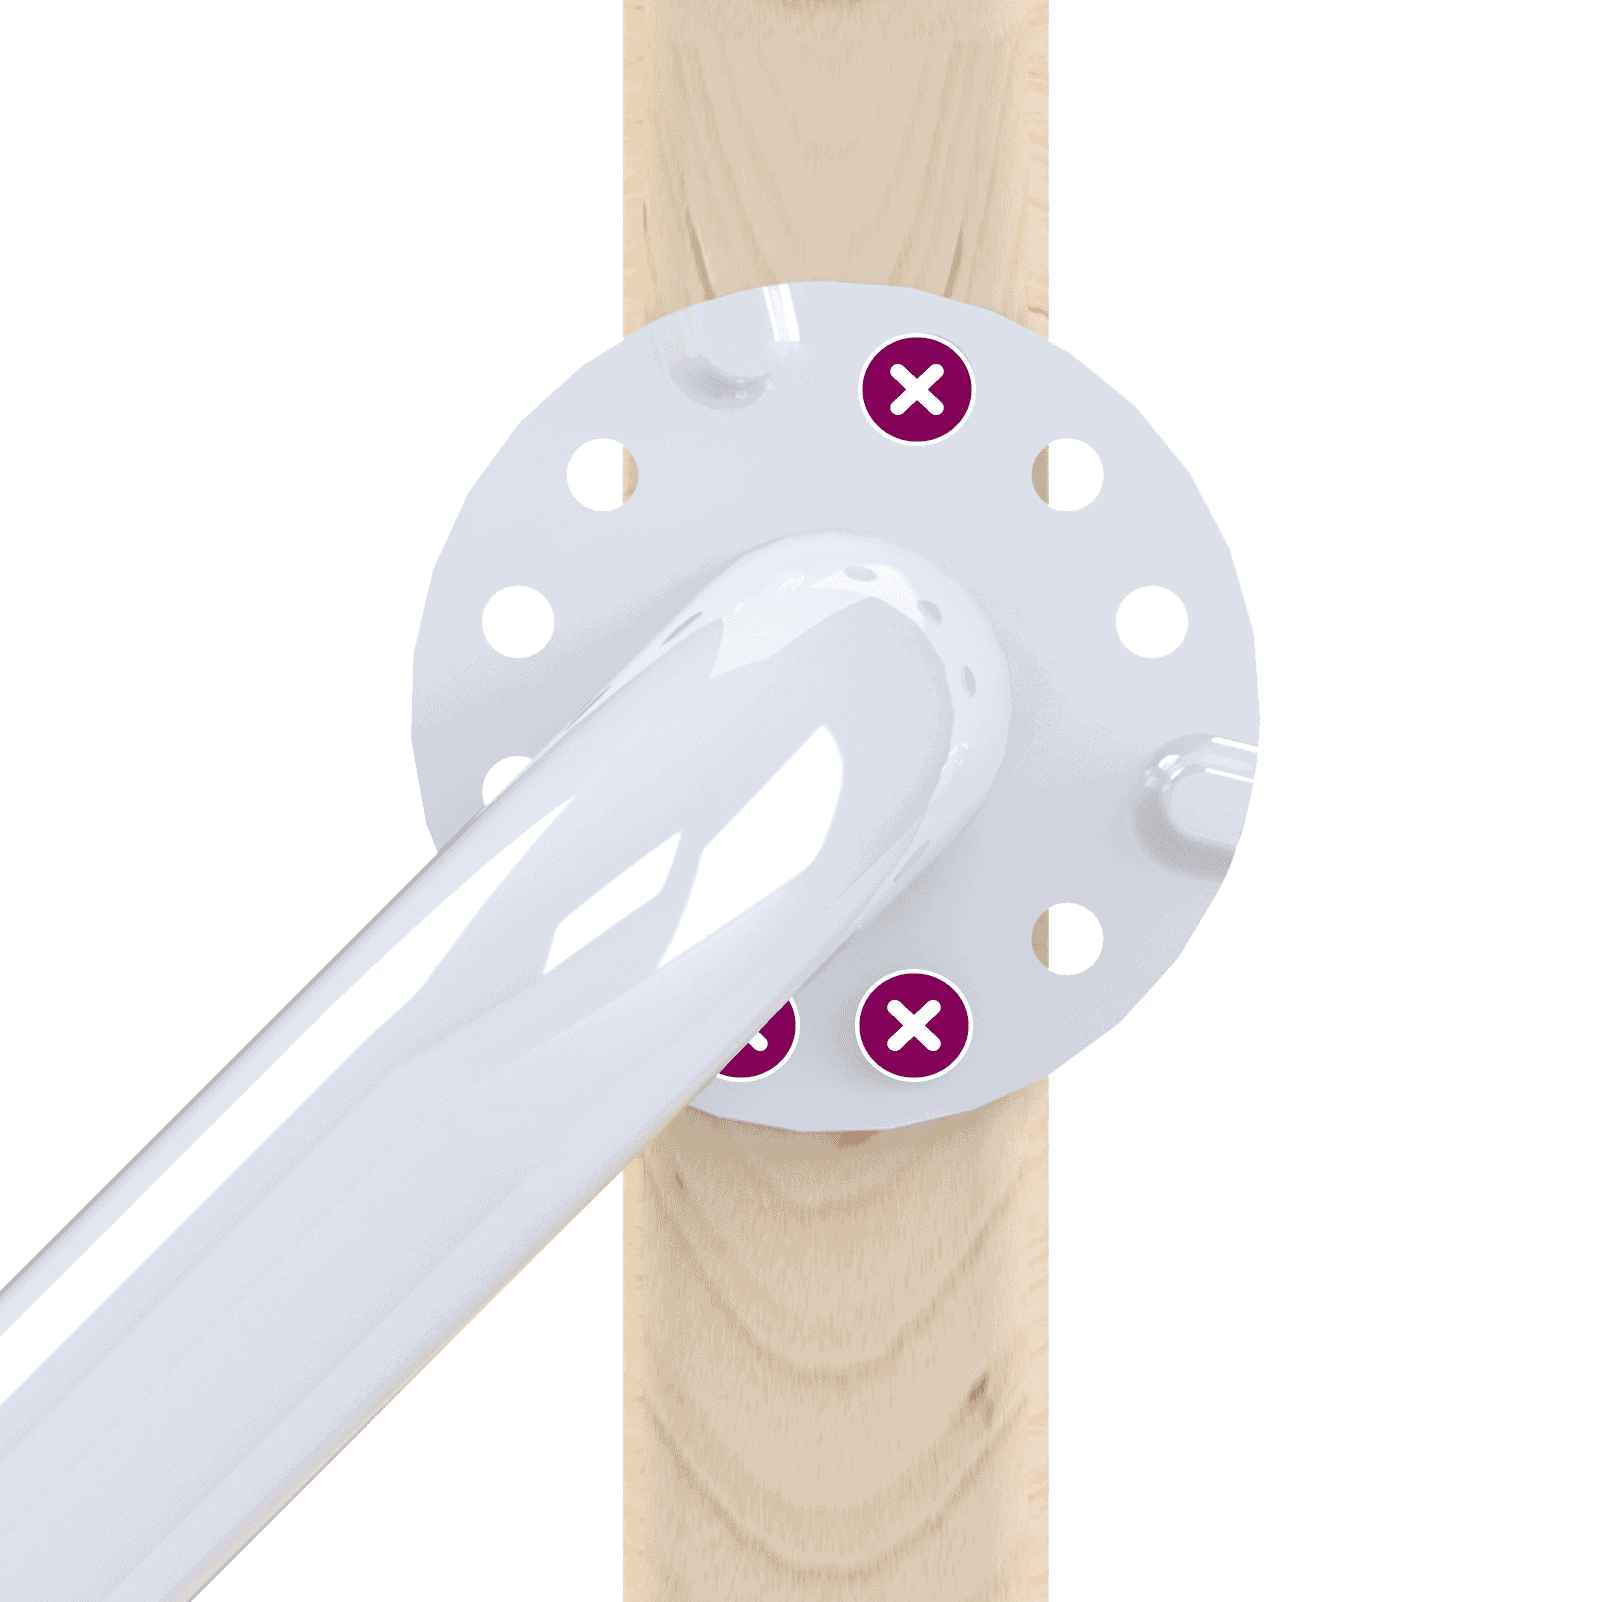 Illustration of an Easy Mount Grab installation, showing how the 9 hole flange makes it easier to install